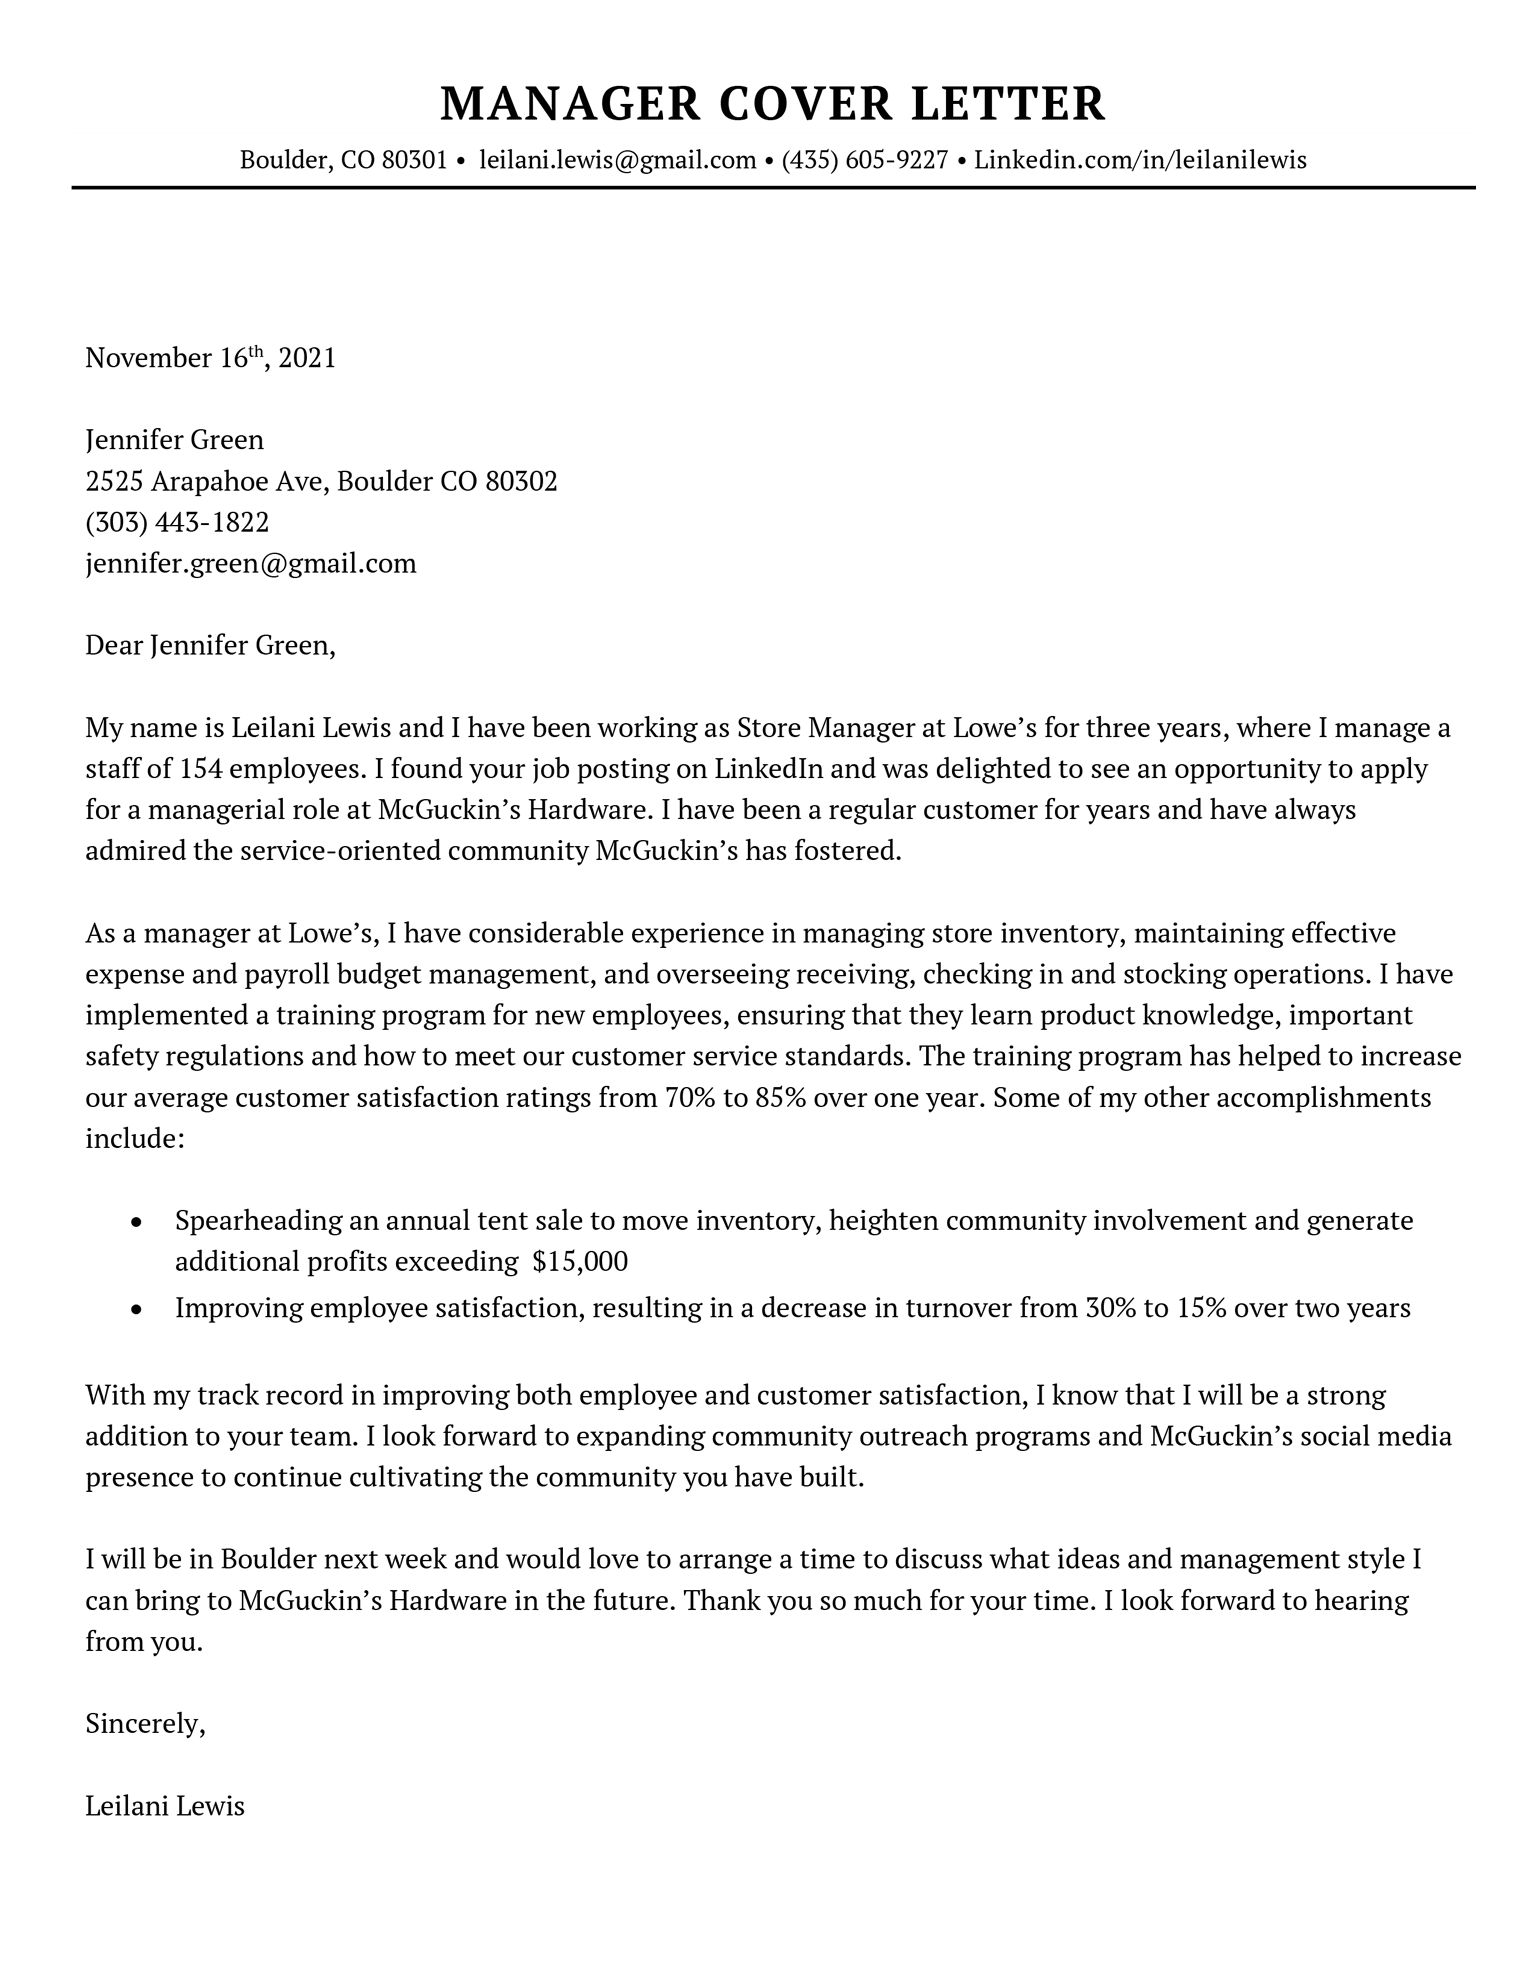 application letter of an manager